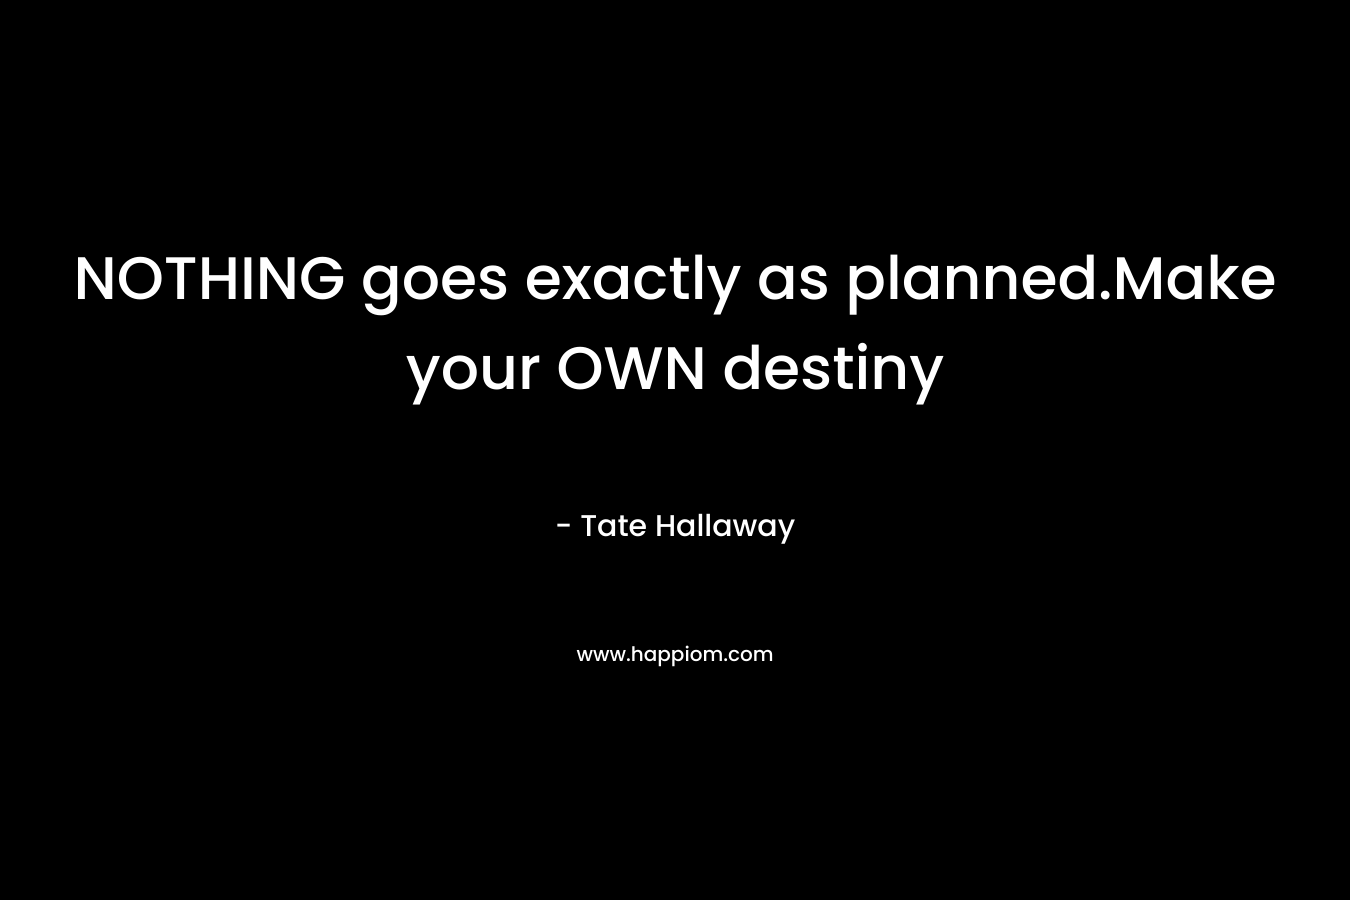 NOTHING goes exactly as planned.Make your OWN destiny